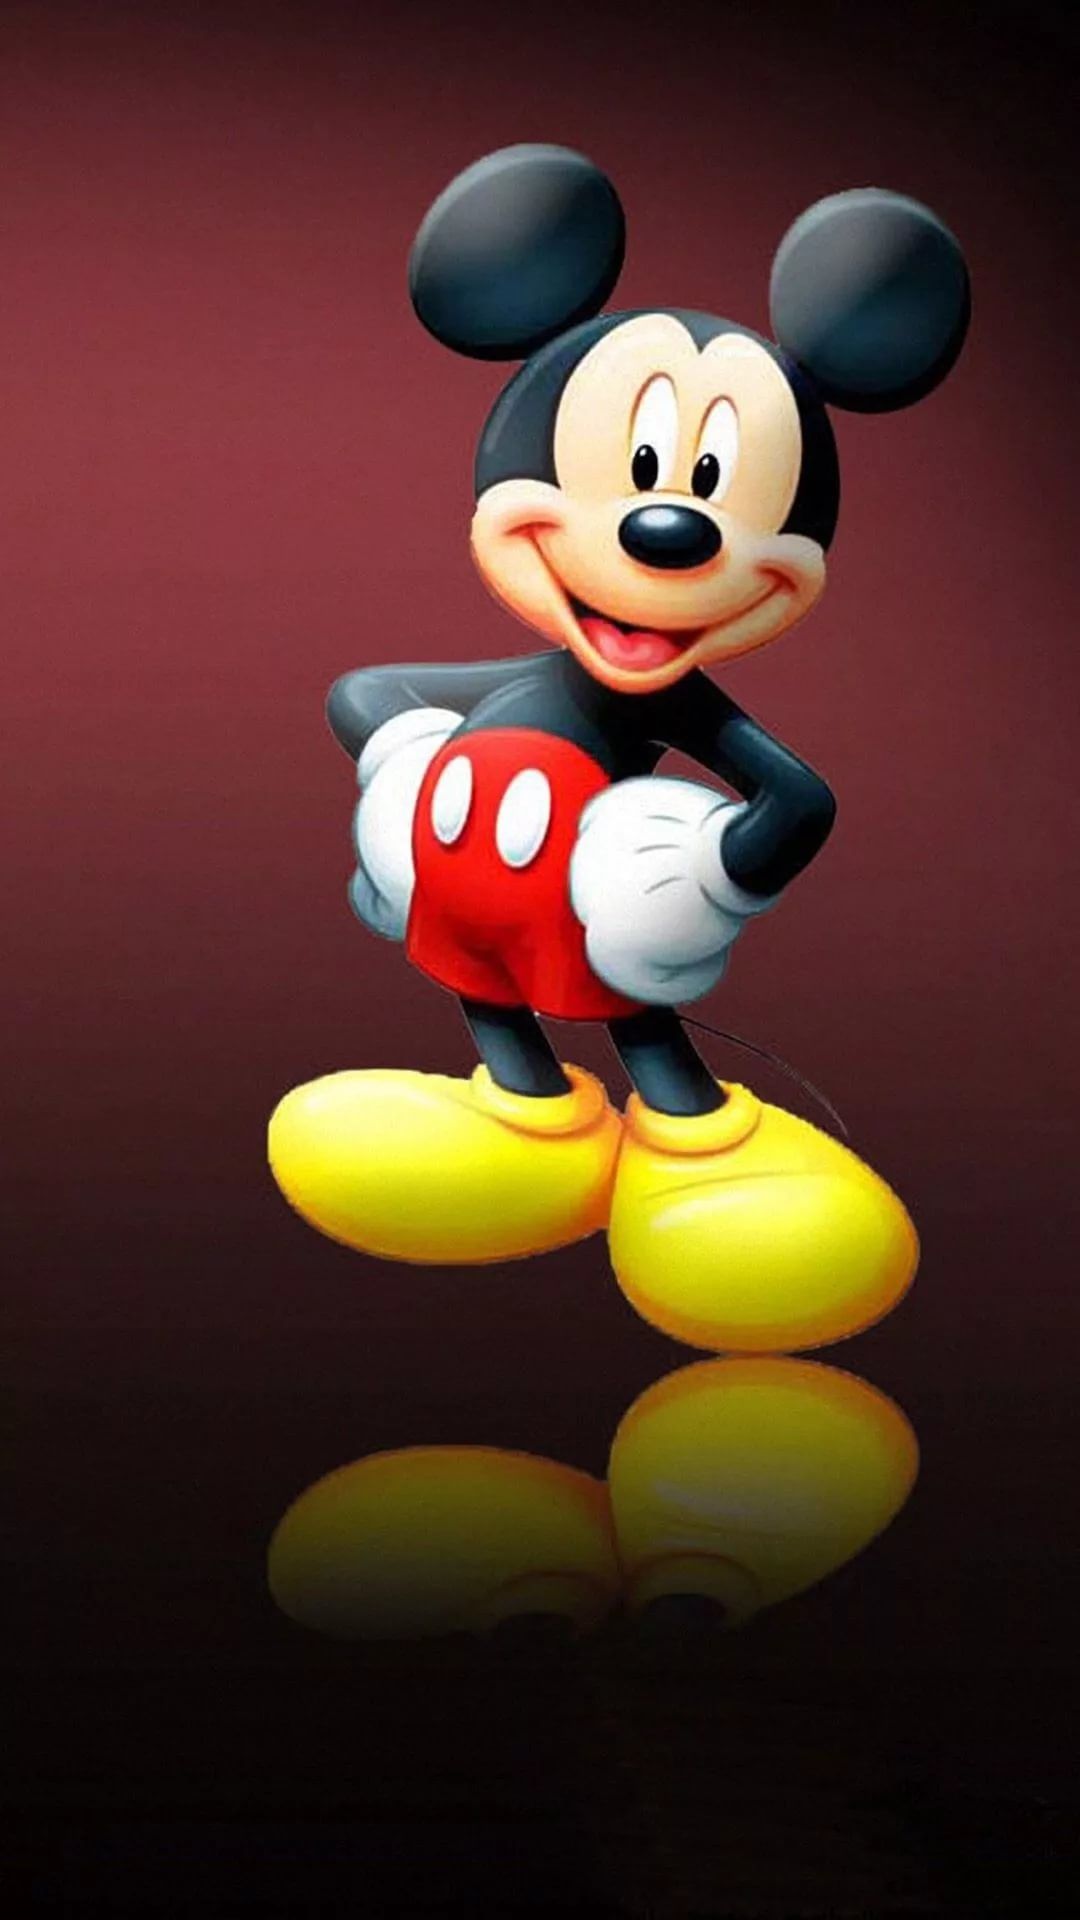 Mickey Mouse Iphone Wallpaper - KoLPaPer - Awesome Free HD Wallpapers